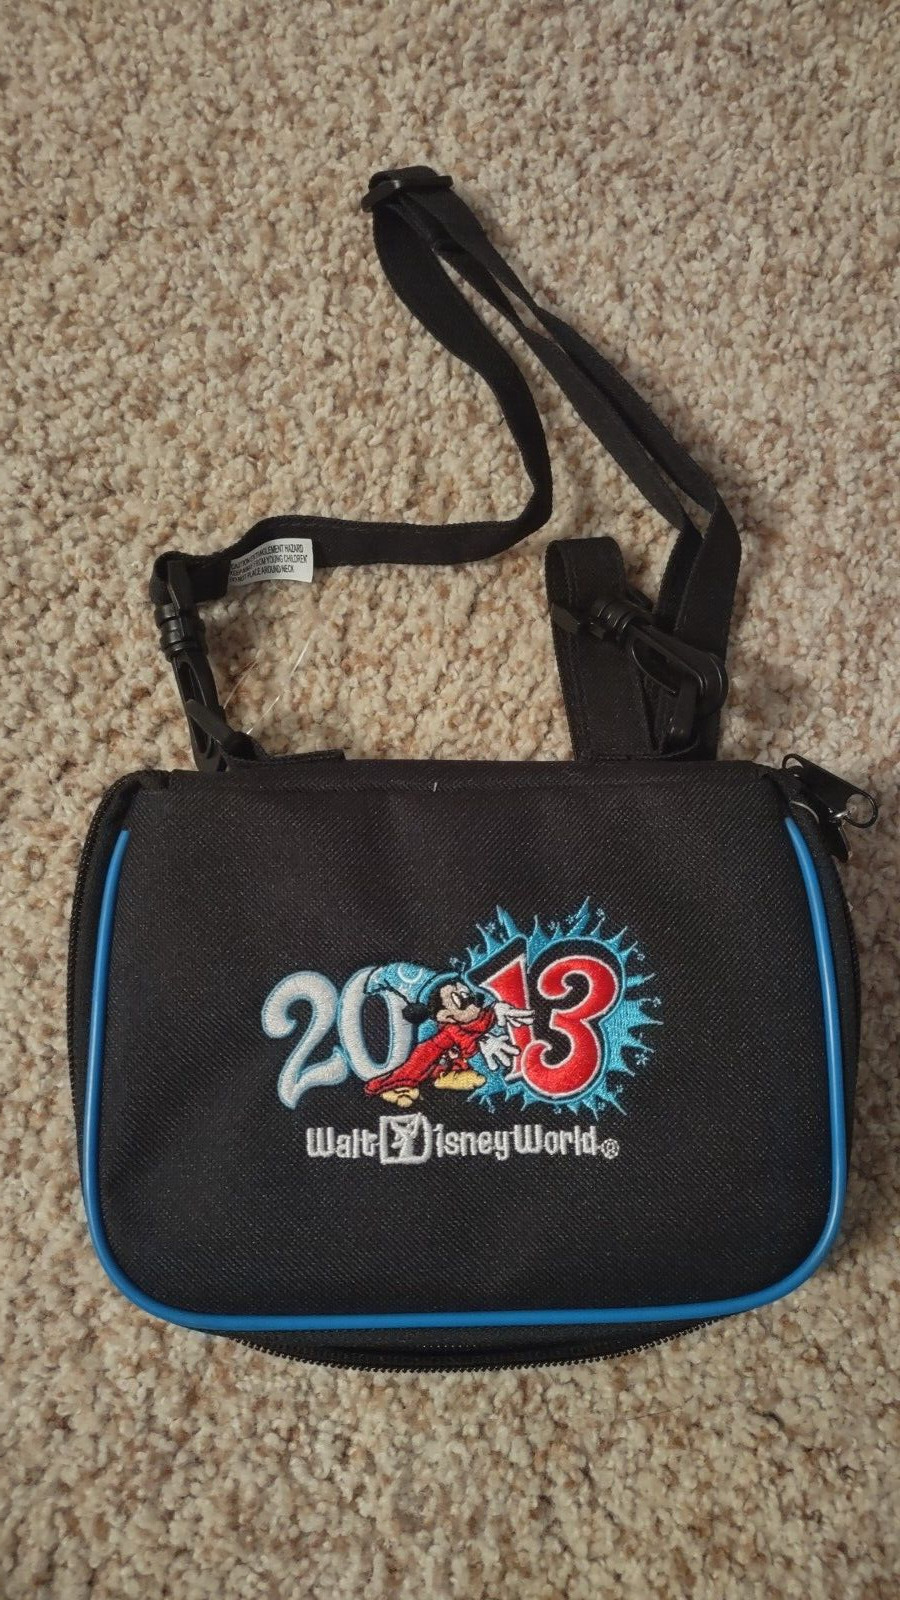 2013 Walt Disney World Sorcerer Mickey Pin Trading Collector Bag, hard to find